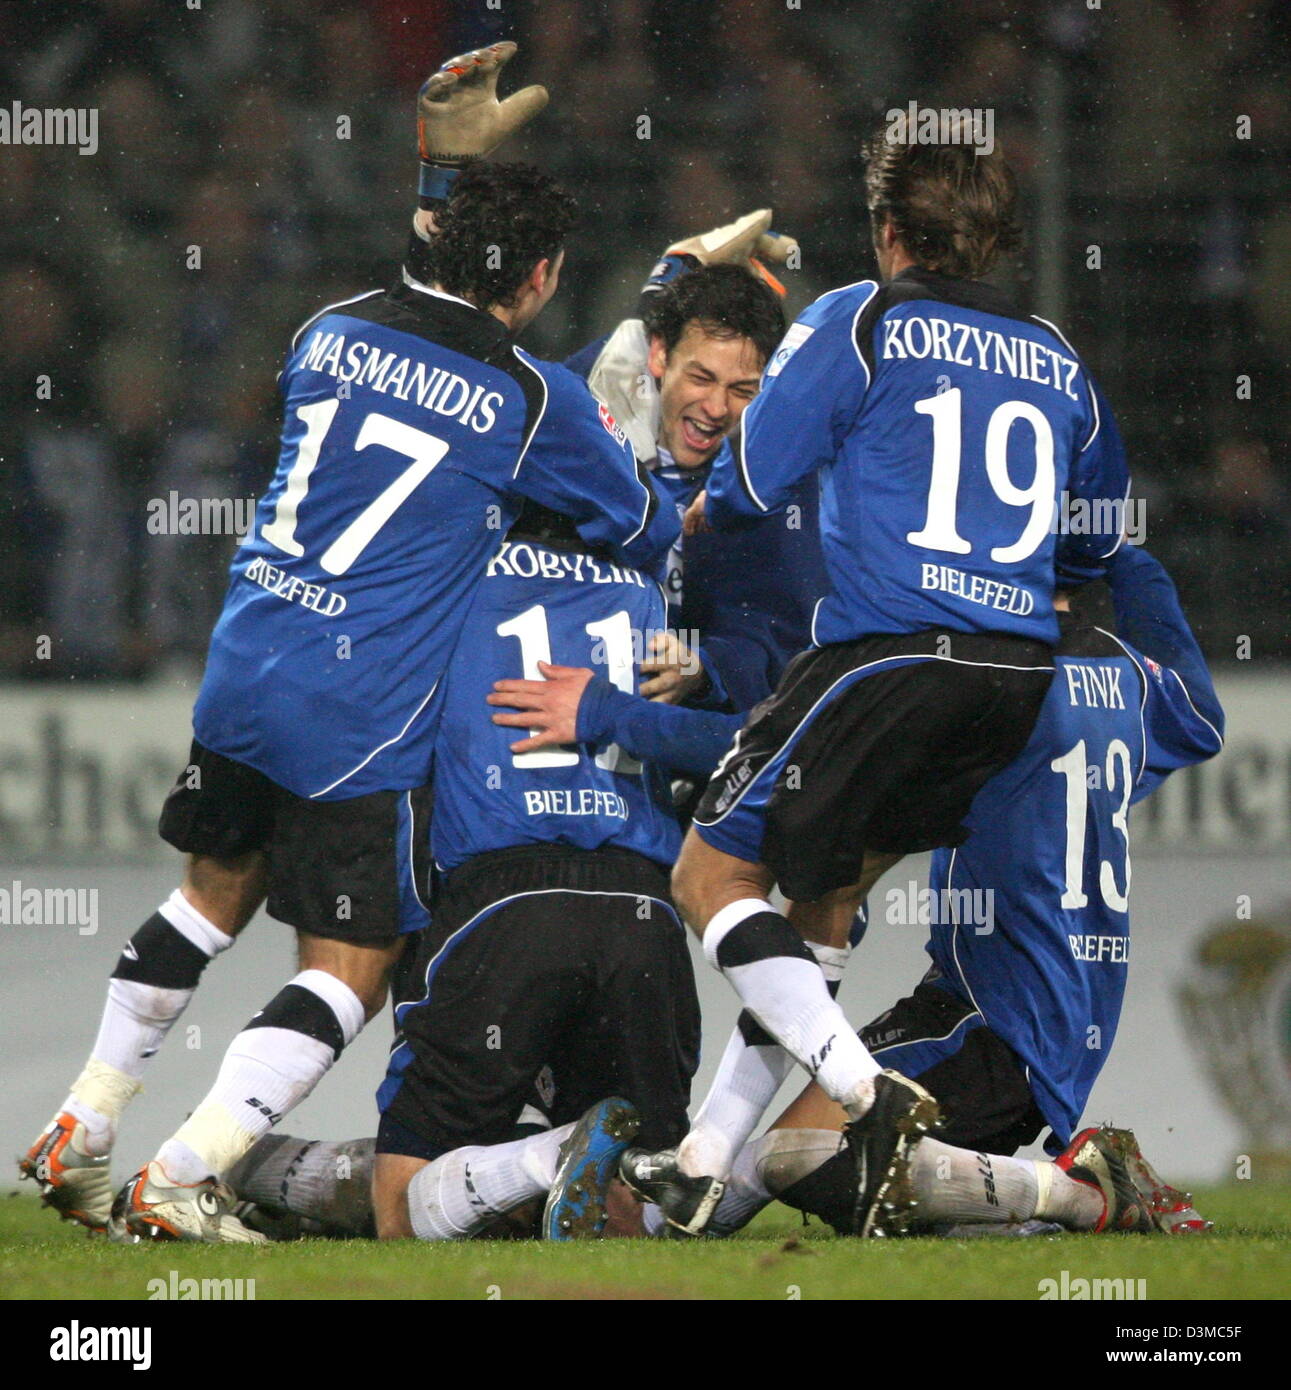 Arminia Bielefeld's Ioannis Masmanidis, David Kobylik, Markus Schuler, Bernd Korzynietz and Michael Fink (L-R) celebrate their team's triumph over Kickers Offenbach after the German Cup quarter-finals soccer match at the Schueco Arena stadium in Bielefeld, Germany, Wednesday 25 January 2006. Around12,000 spectators watched Bielefeld advance to the semi-finals after a penalty shoot- Stock Photo